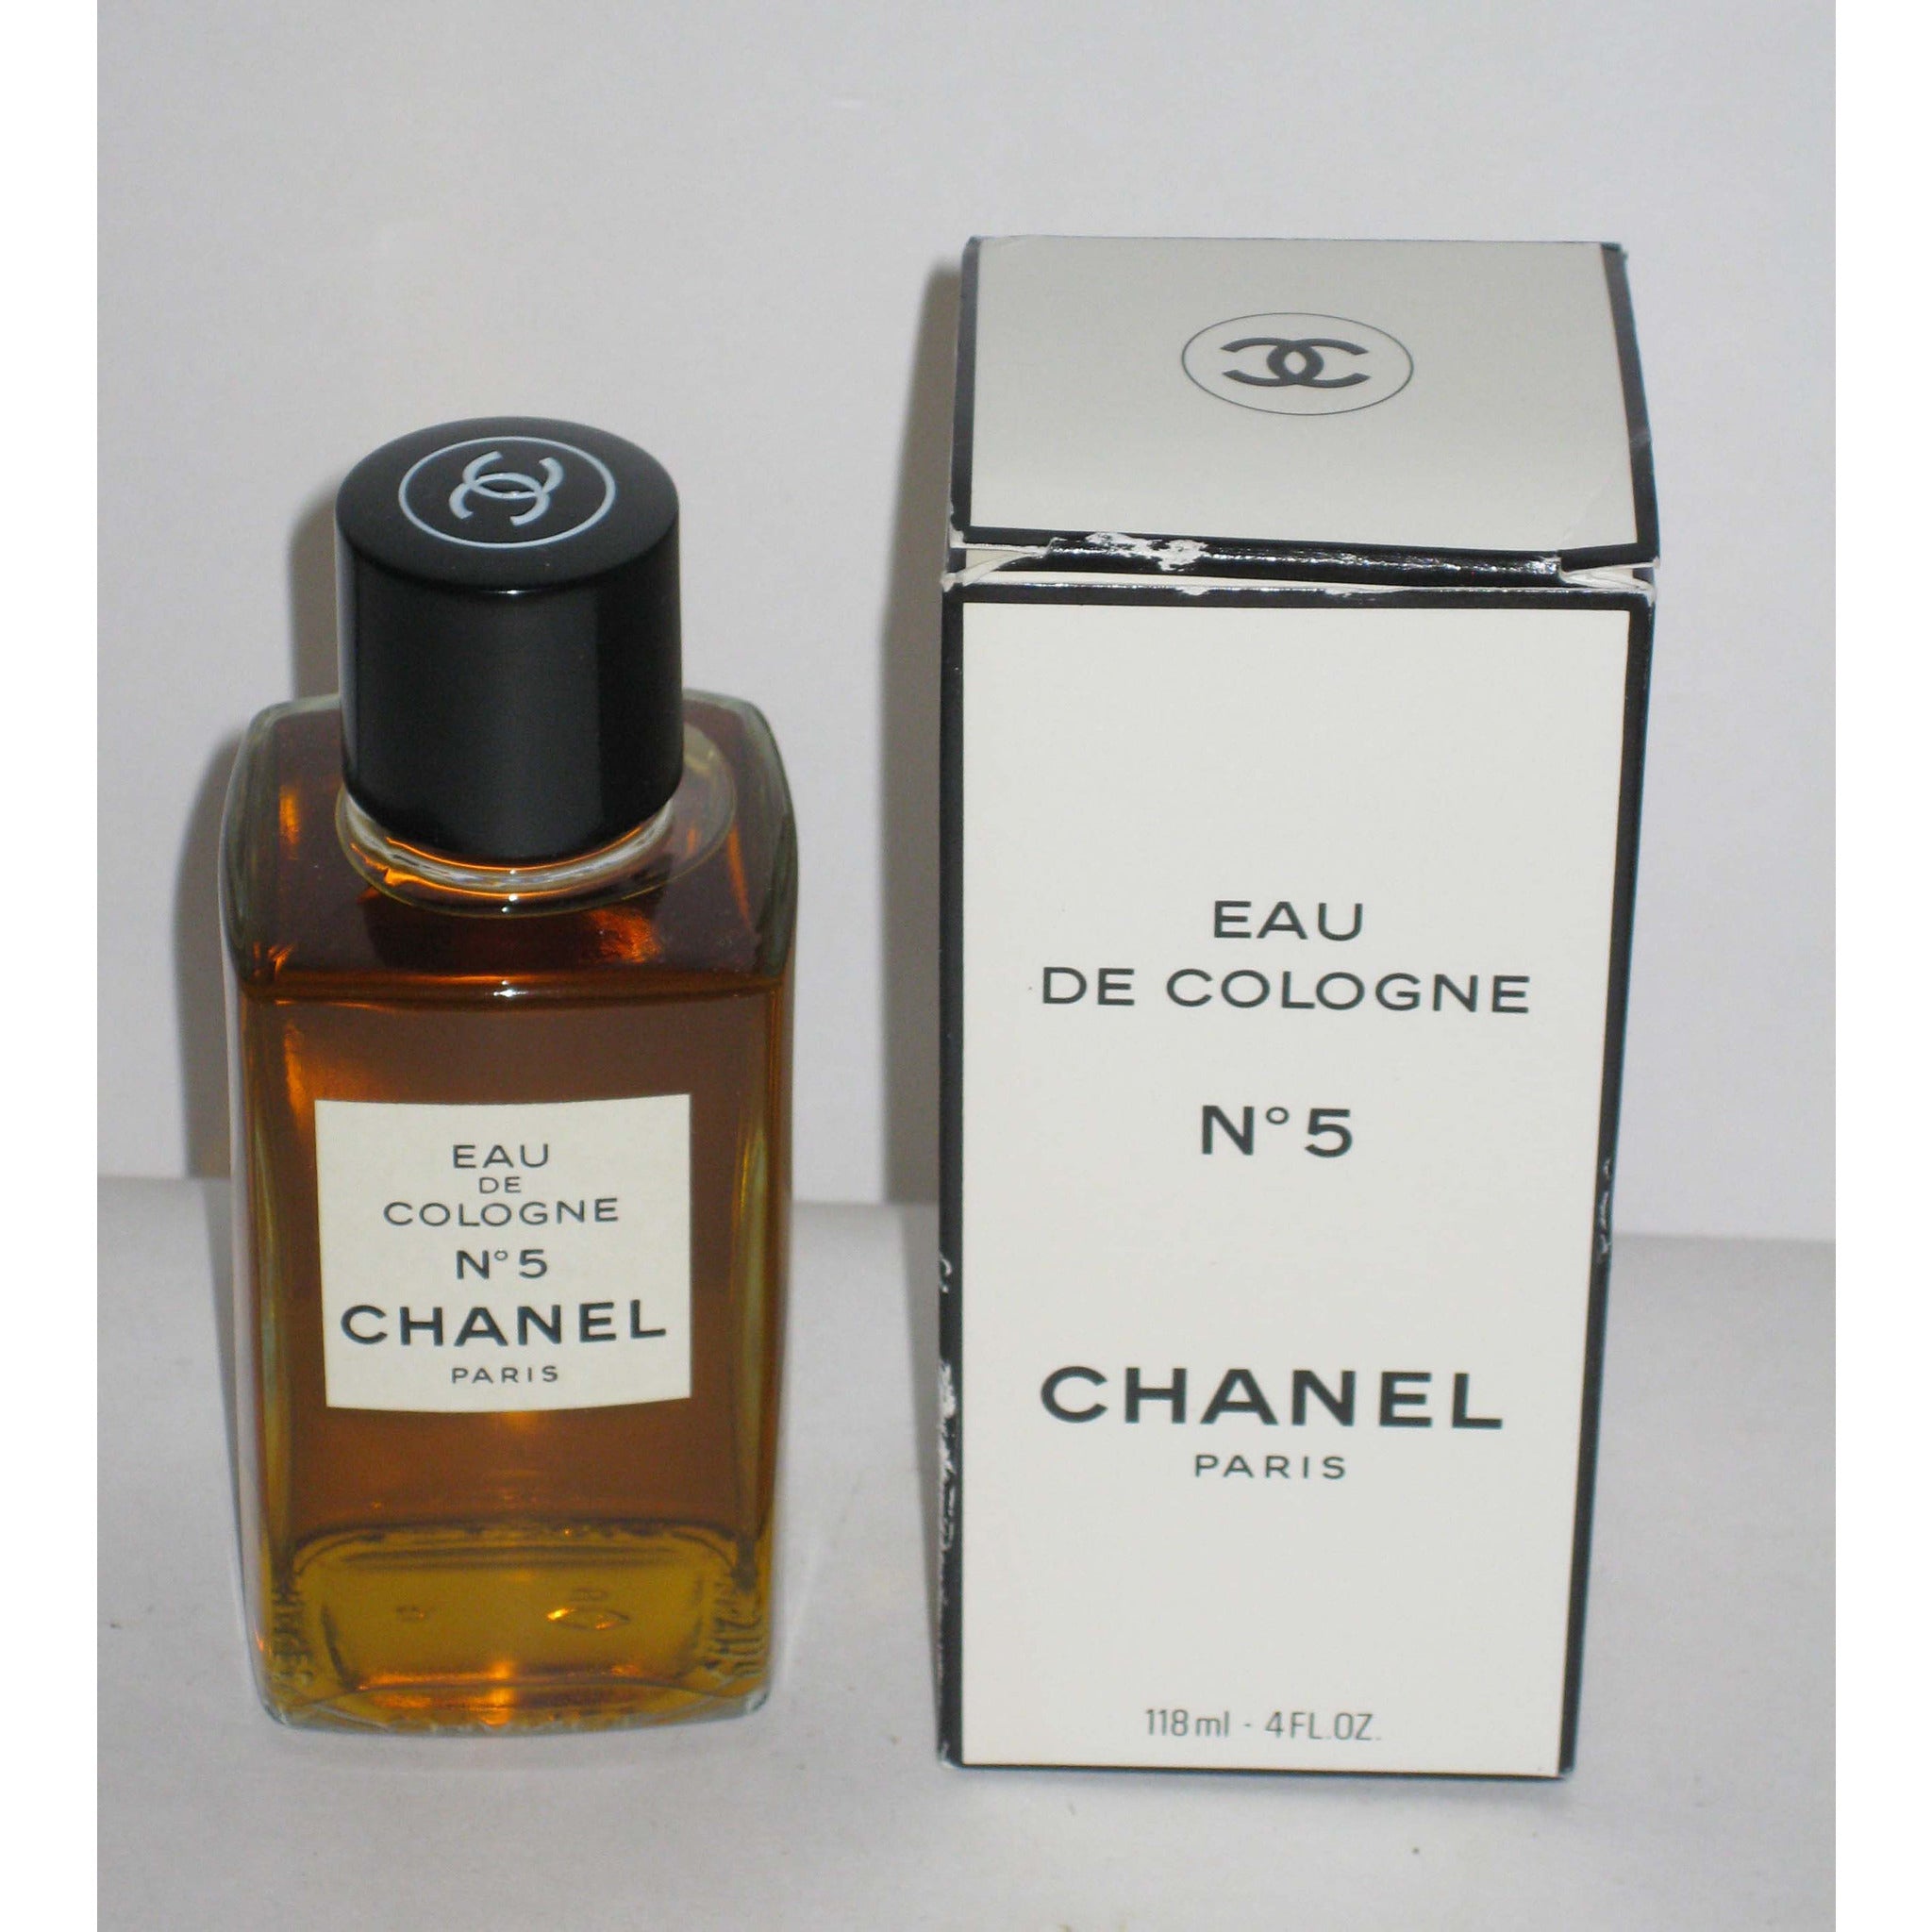 Chanel No. 5 L'eau Perfume By Chanel for Women